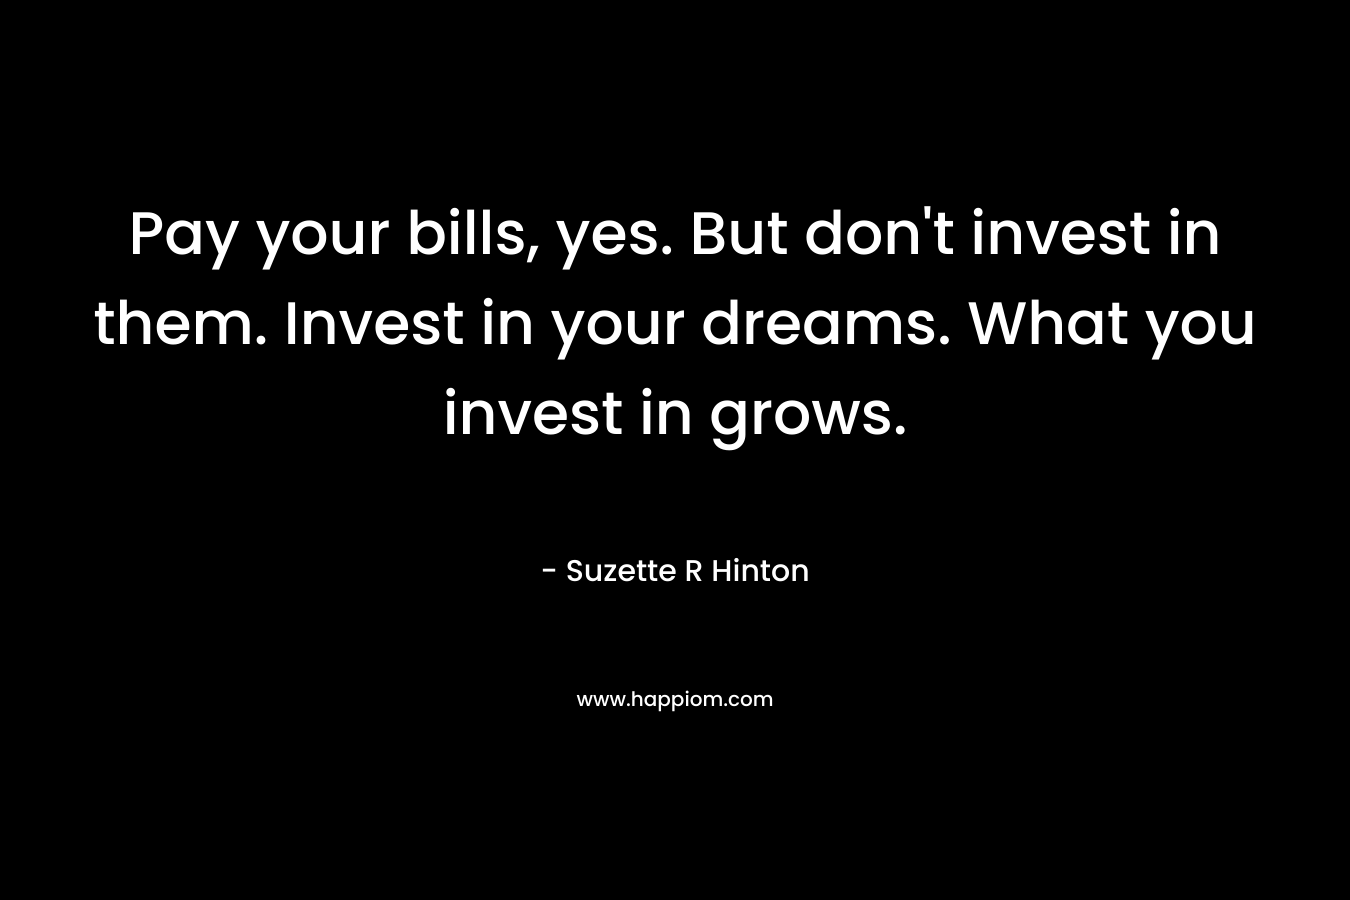 Pay your bills, yes. But don't invest in them. Invest in your dreams. What you invest in grows.